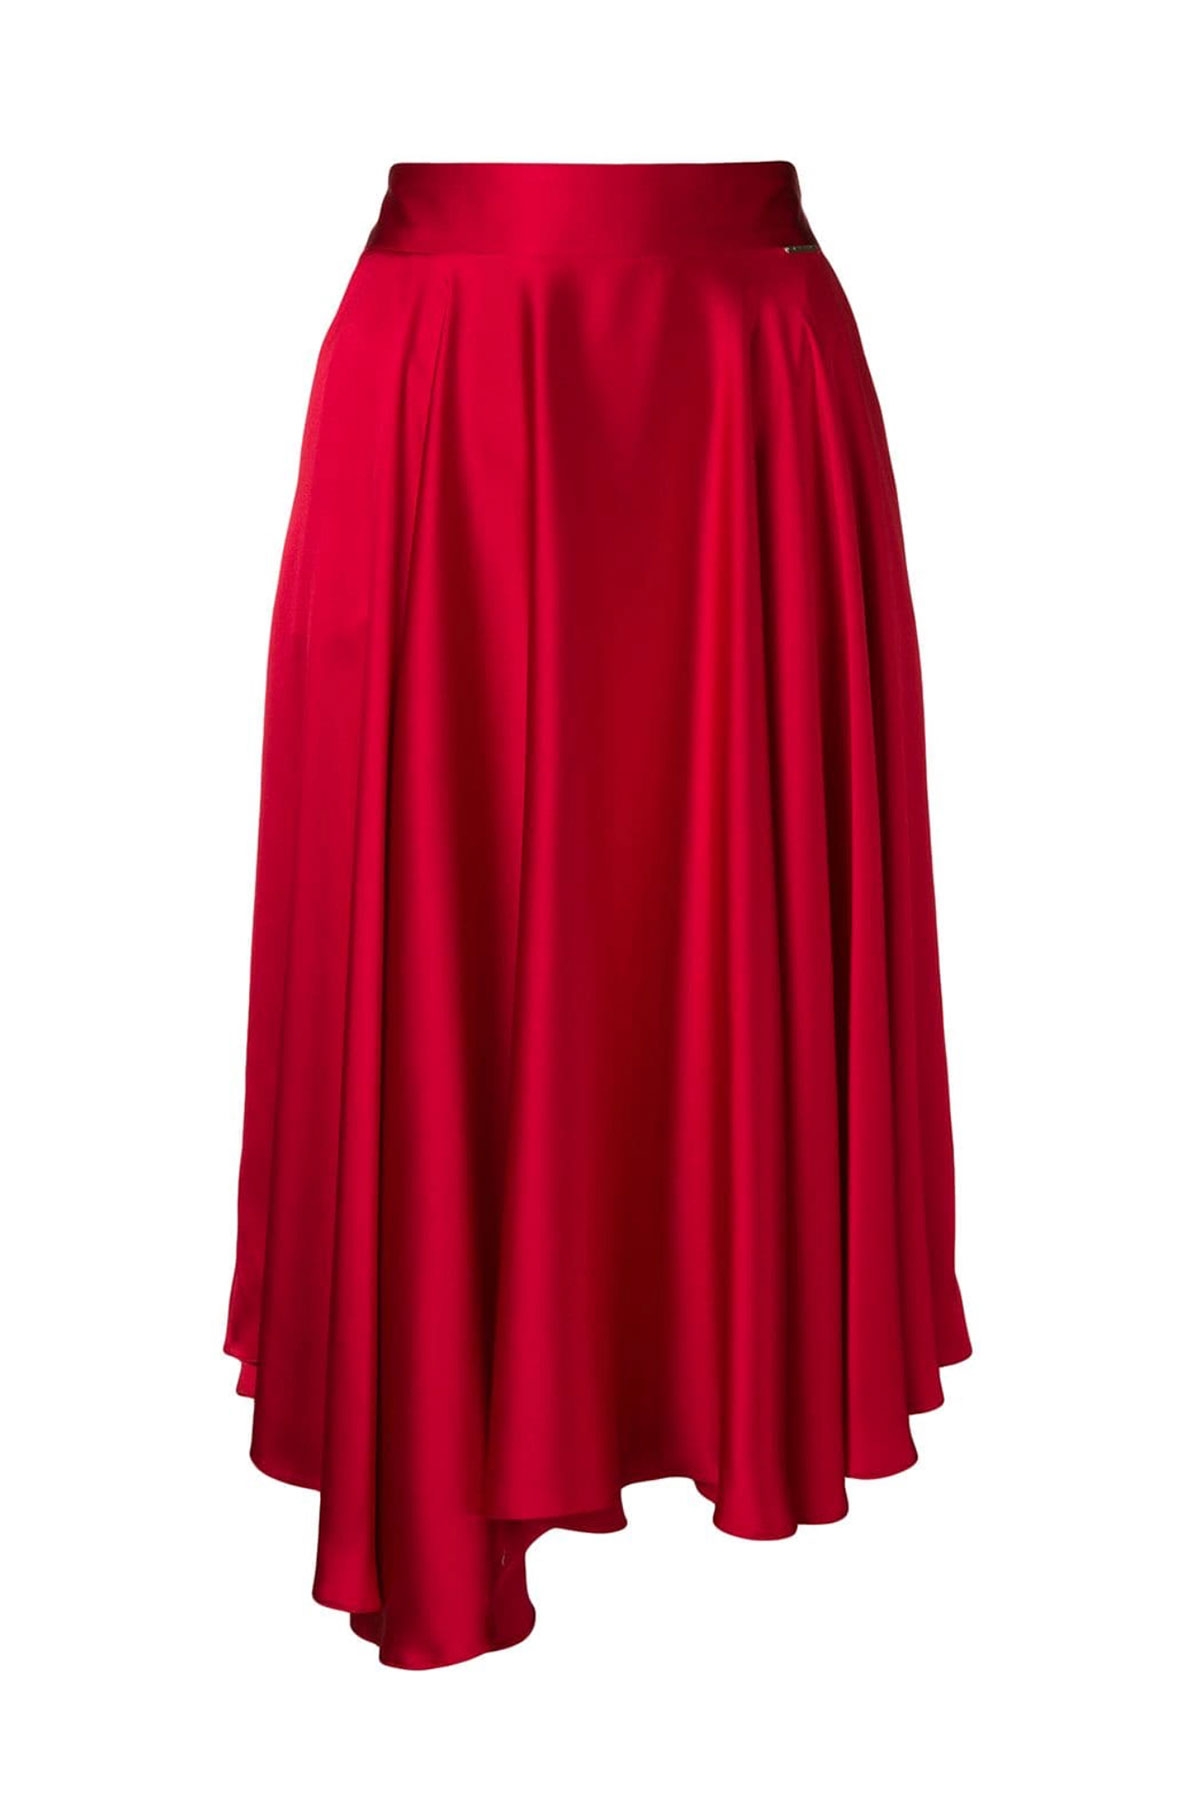 RED LONG SKIRT WITH SINGLE POCKET - STYLAND